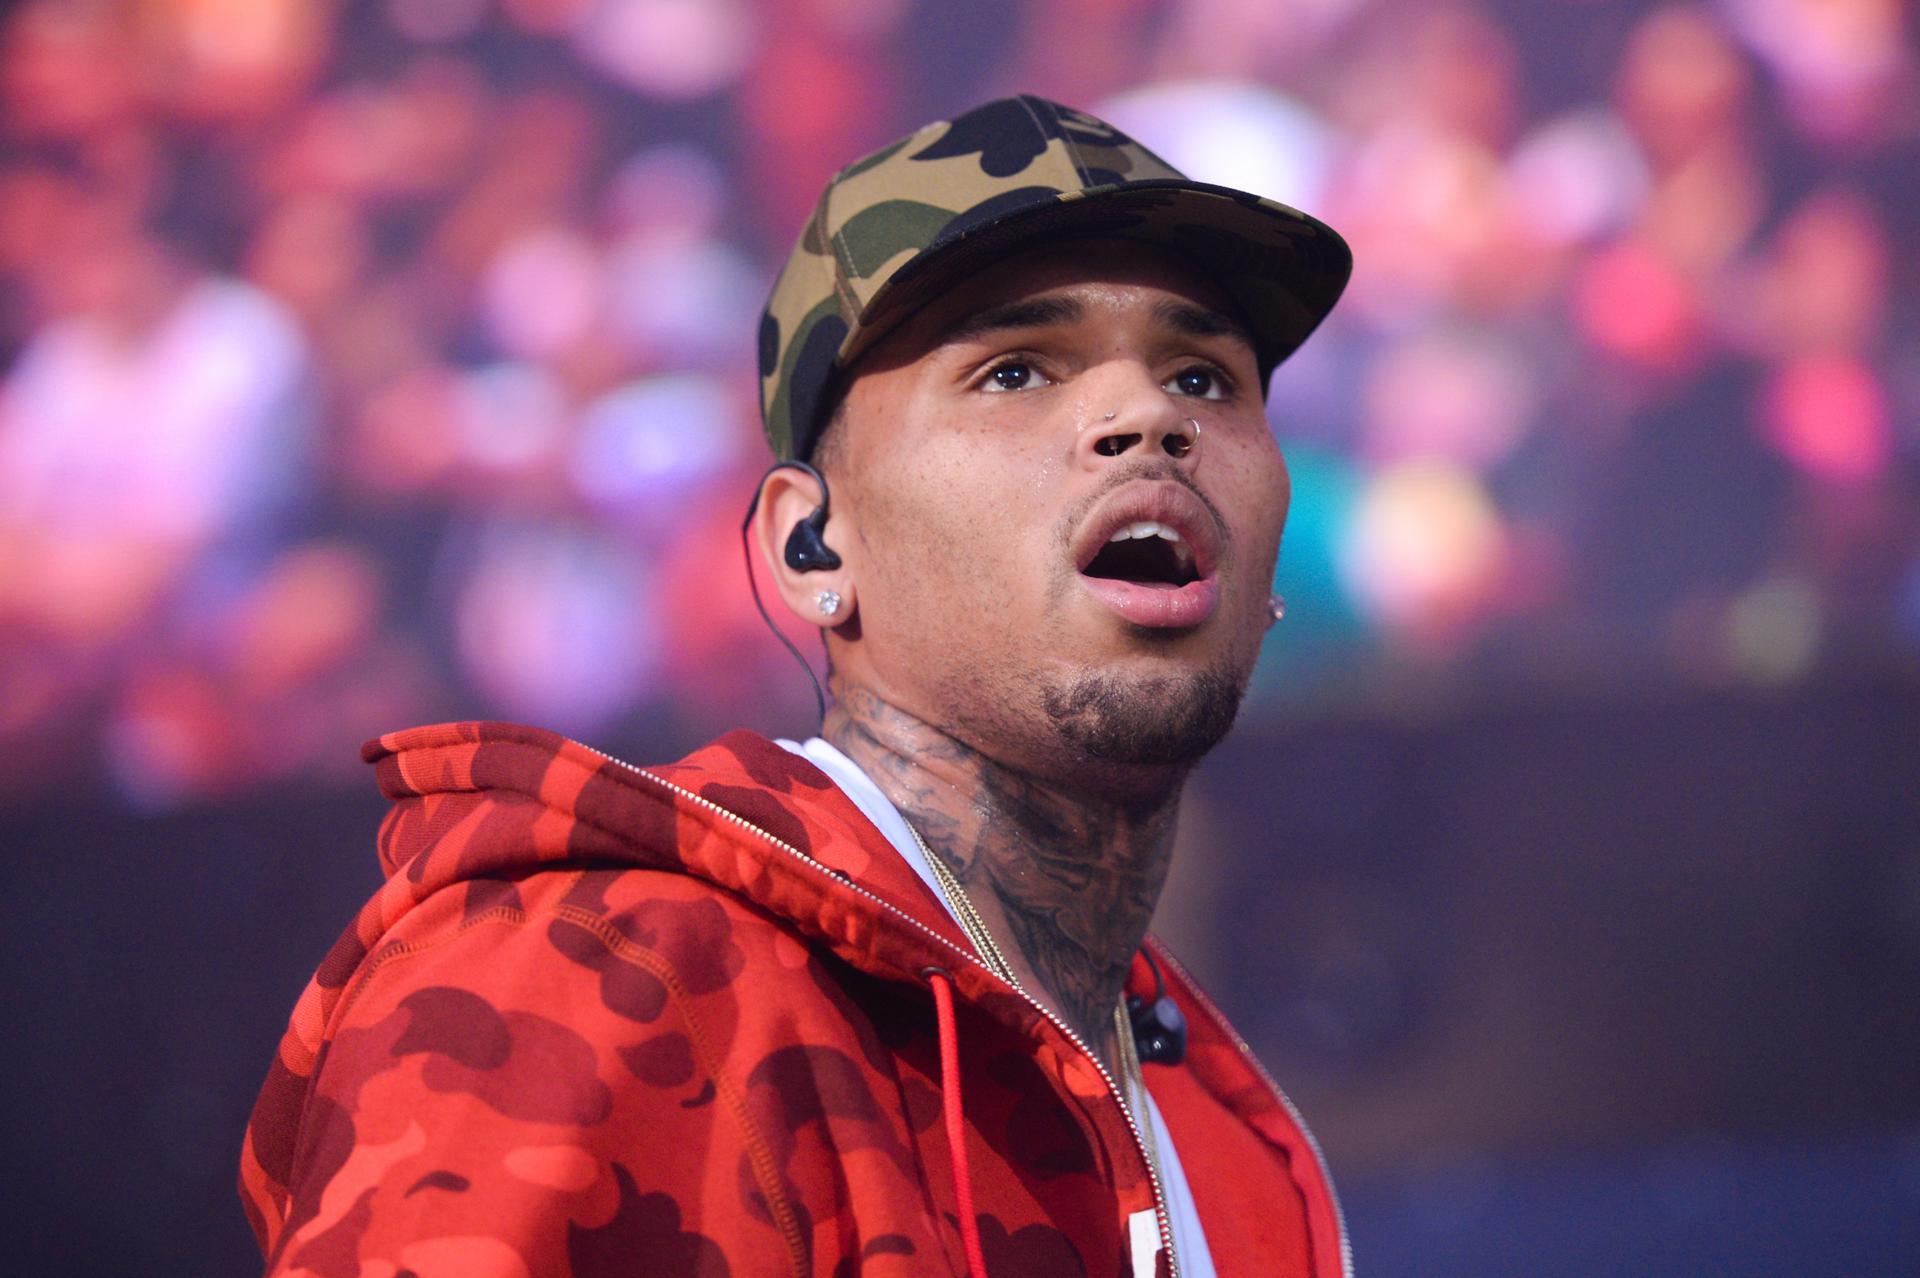 Chris Brown out on bail after being arrested for threatening a woman with a gun